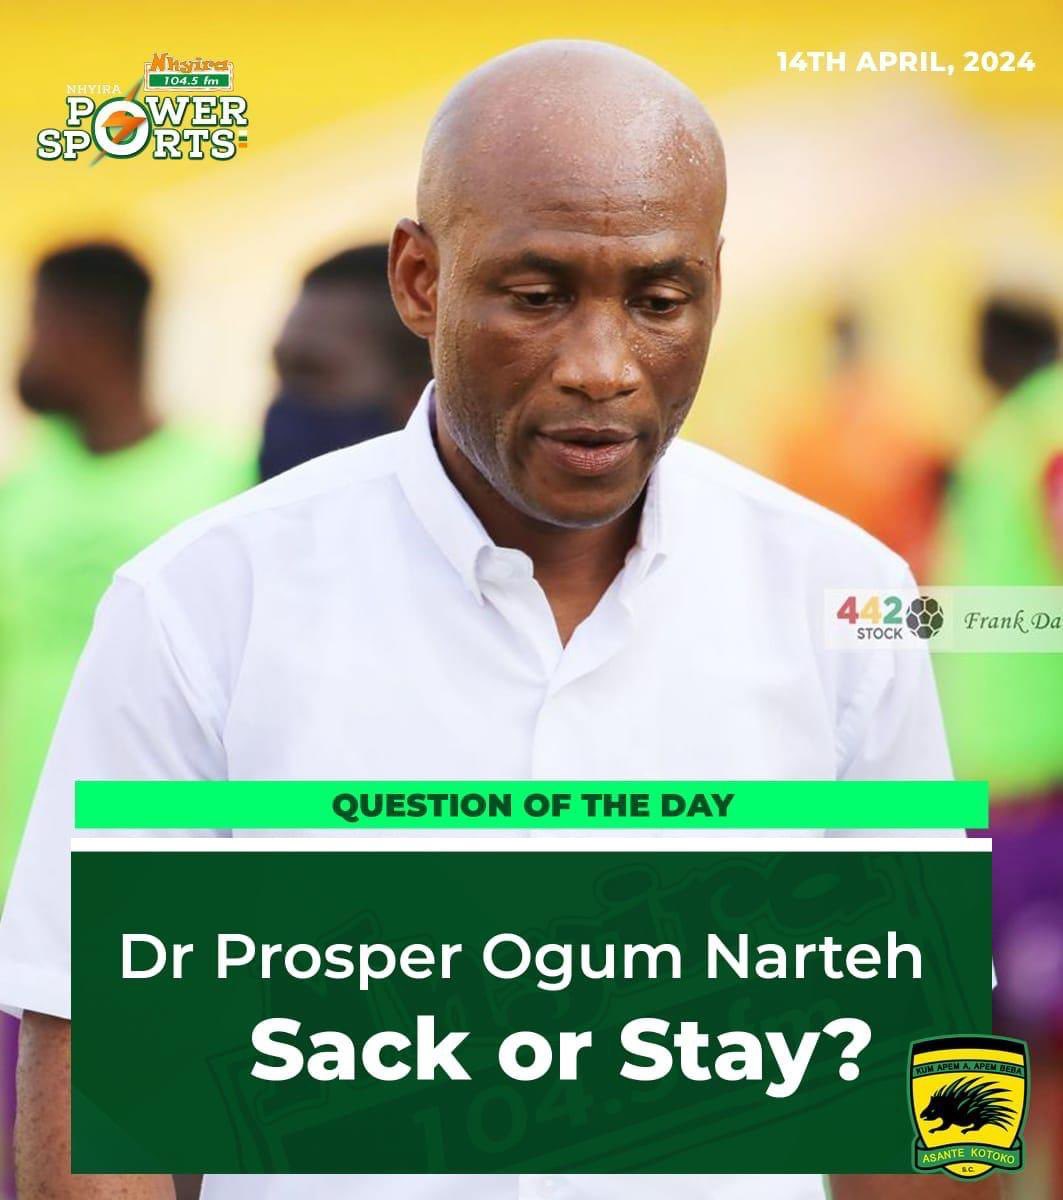 What should Kotoko do with this bald headed man? He’s so arrogant and disrespectful! THE WAGES OF SIN IS DEATH!!!!